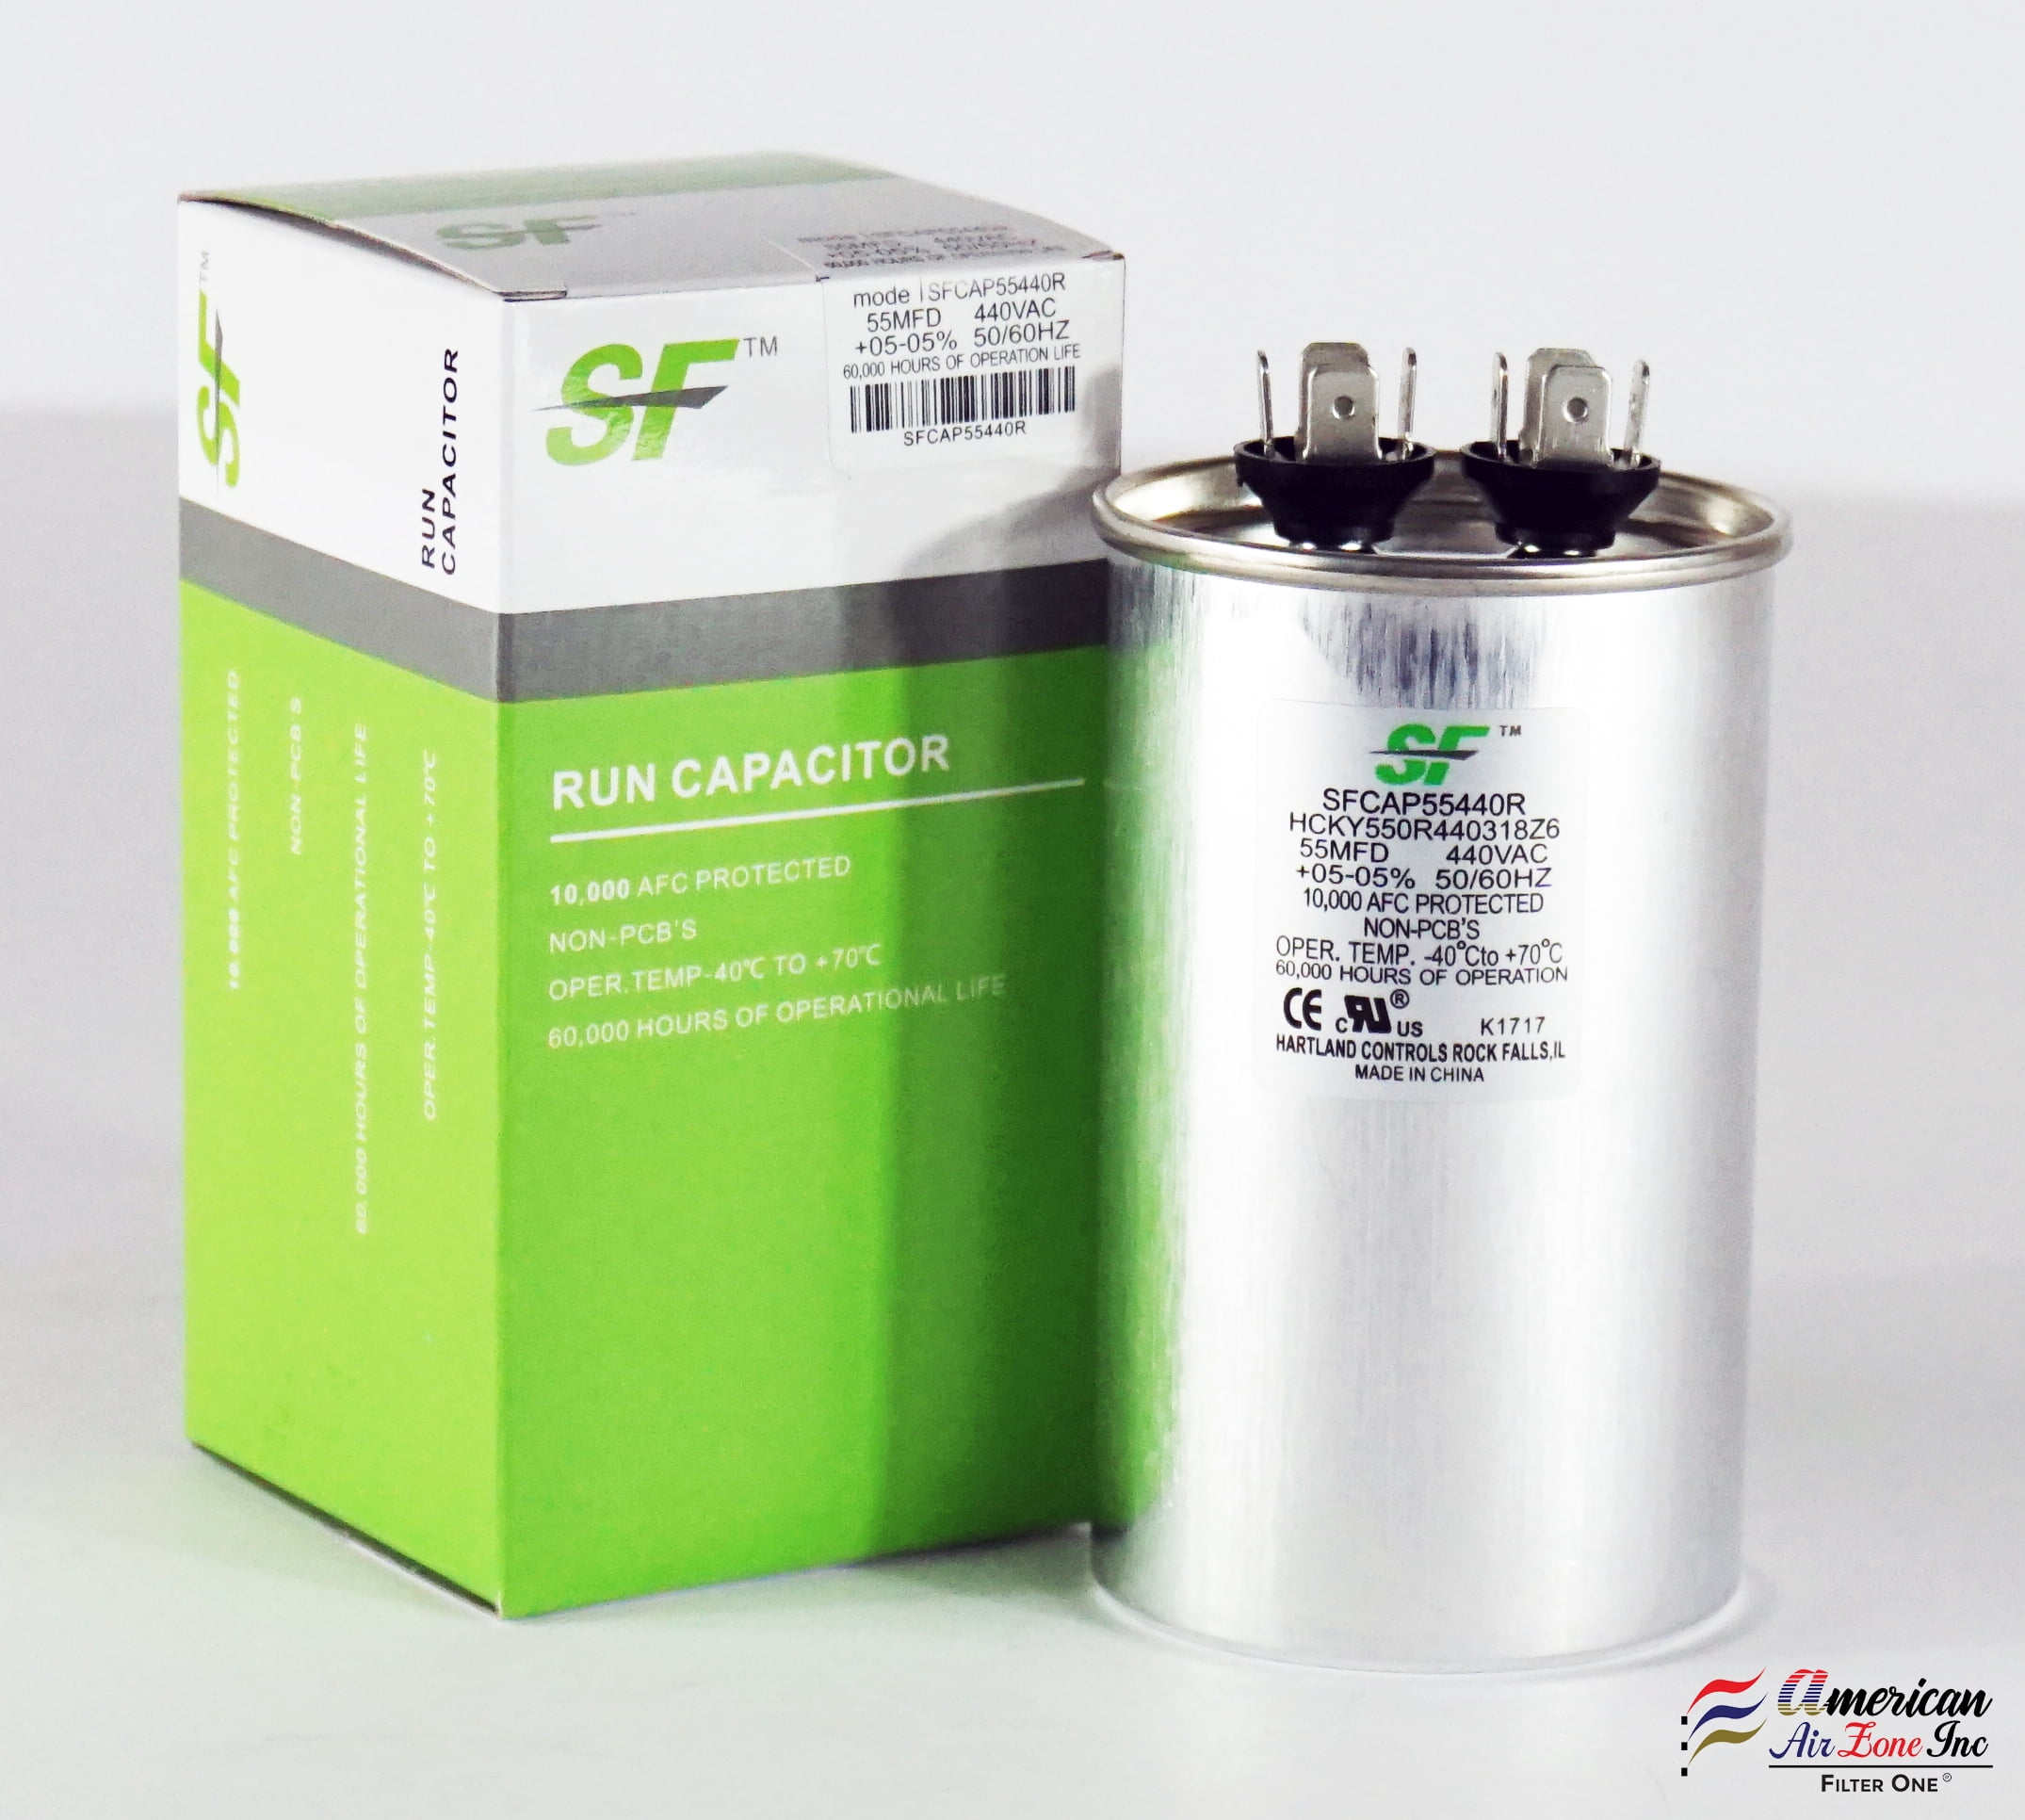 Fans or AC Compressors Oval 370/440 Volts 2-Pack Replaces other Brands Capacitors MicroFarad TRANE SF 20 MFD for Motors Run Capacitor .